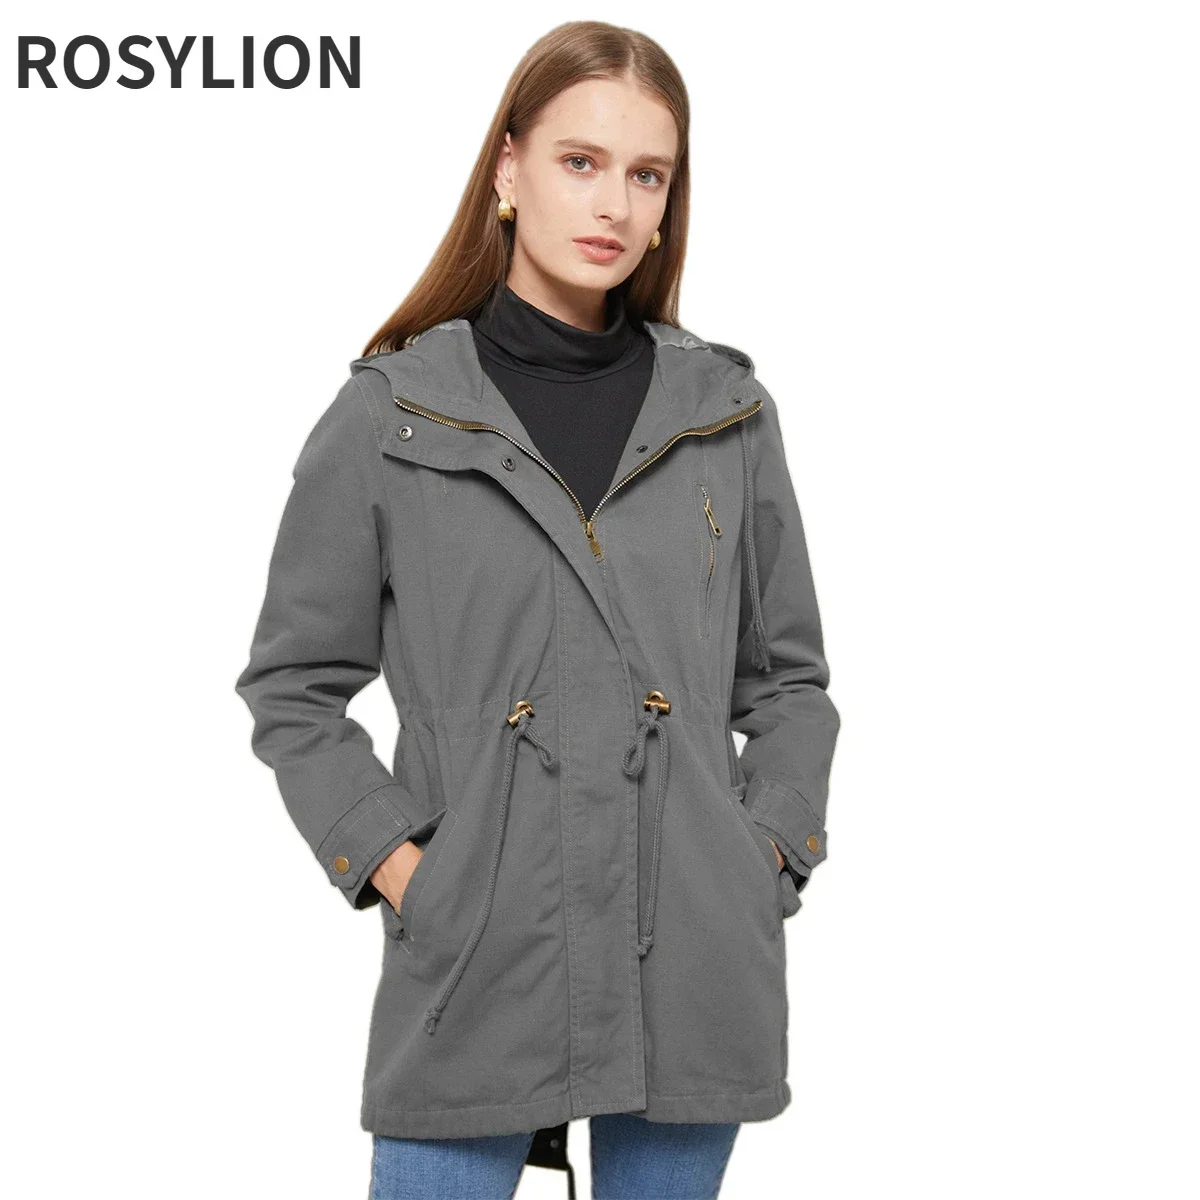 

Women Autumn Winter Hooded Windbreaker European Large Size Loose Army Green Jacket Ladies Cotton Blue White Trench Coat S-4XL